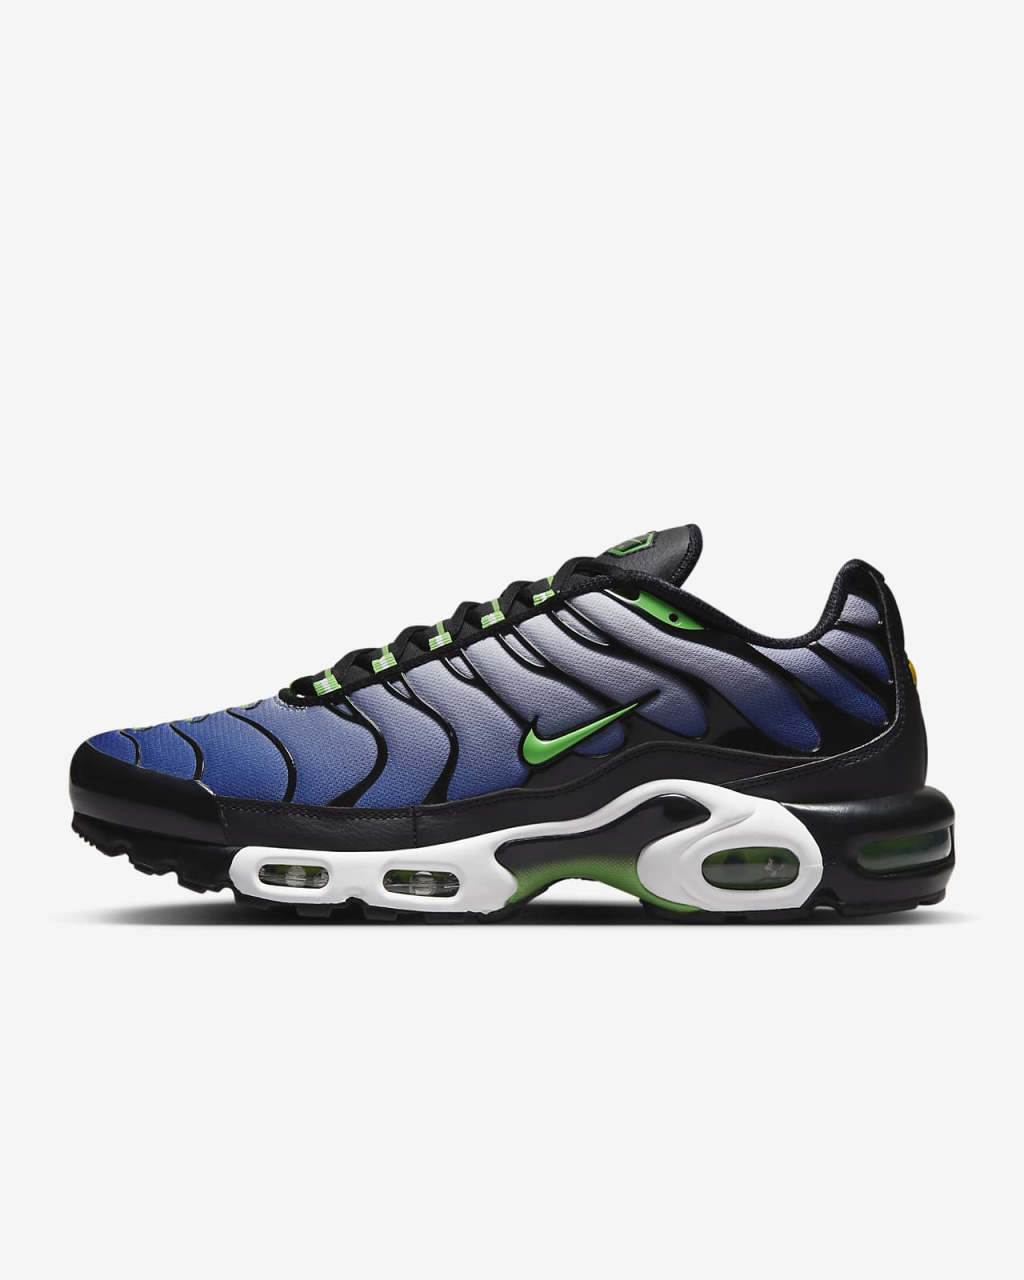 Picture of: Nike Air Max Plus Herrenschuh